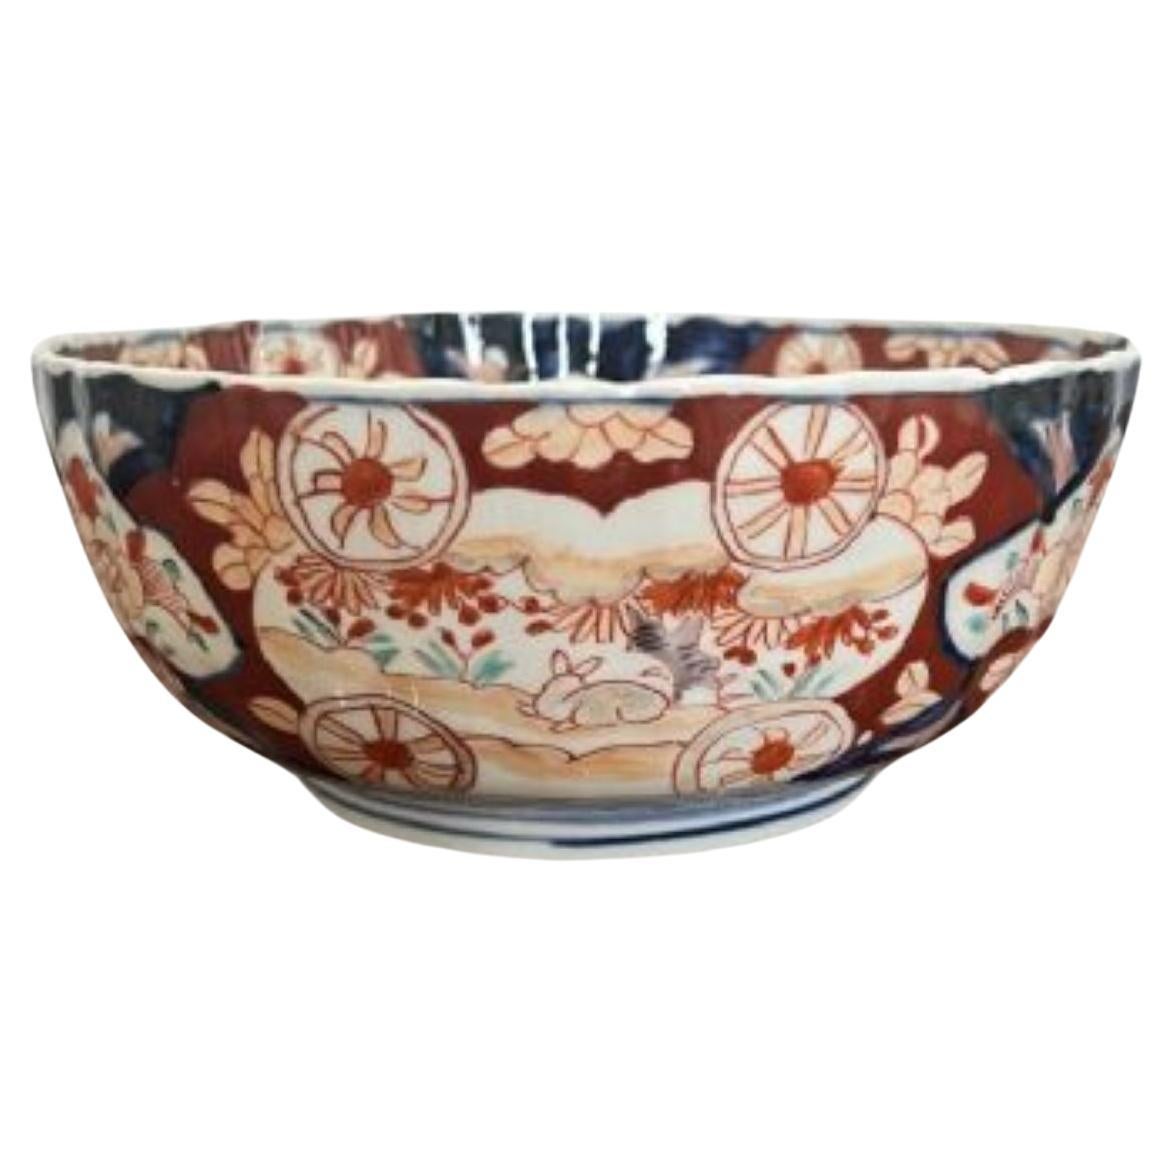 Lovely antique Japanese imari bowl with a scallop shaped edge